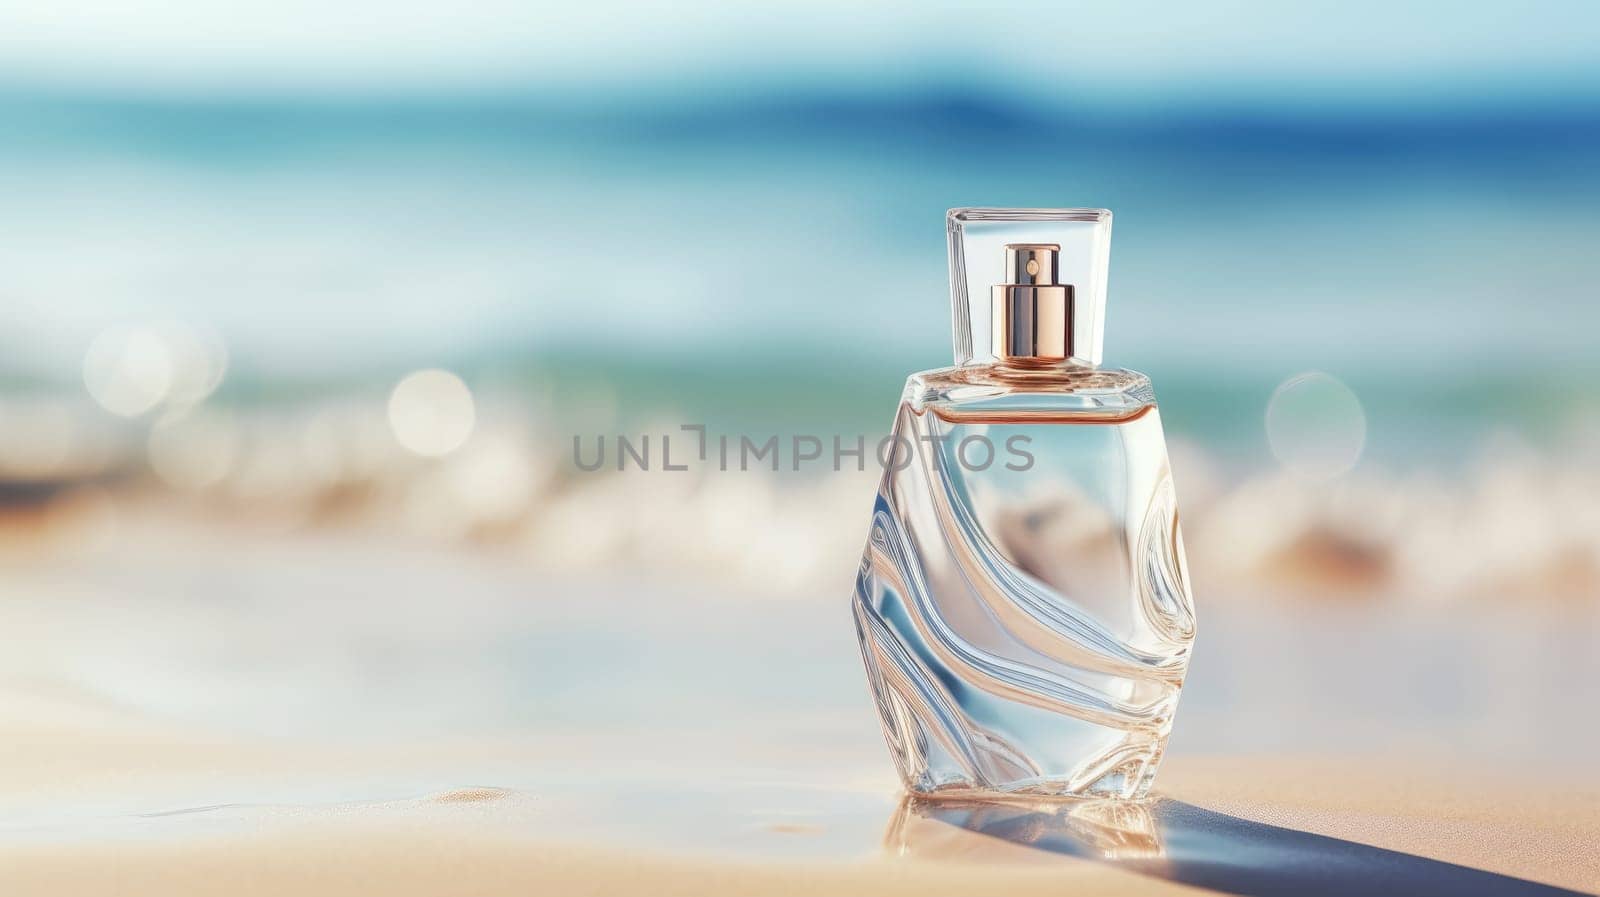 Transparent white glass perfume bottle mockup with sandy beach and ocean waves on background. Eau de toilette. Mockup, spring flat lay. by JuliaDorian